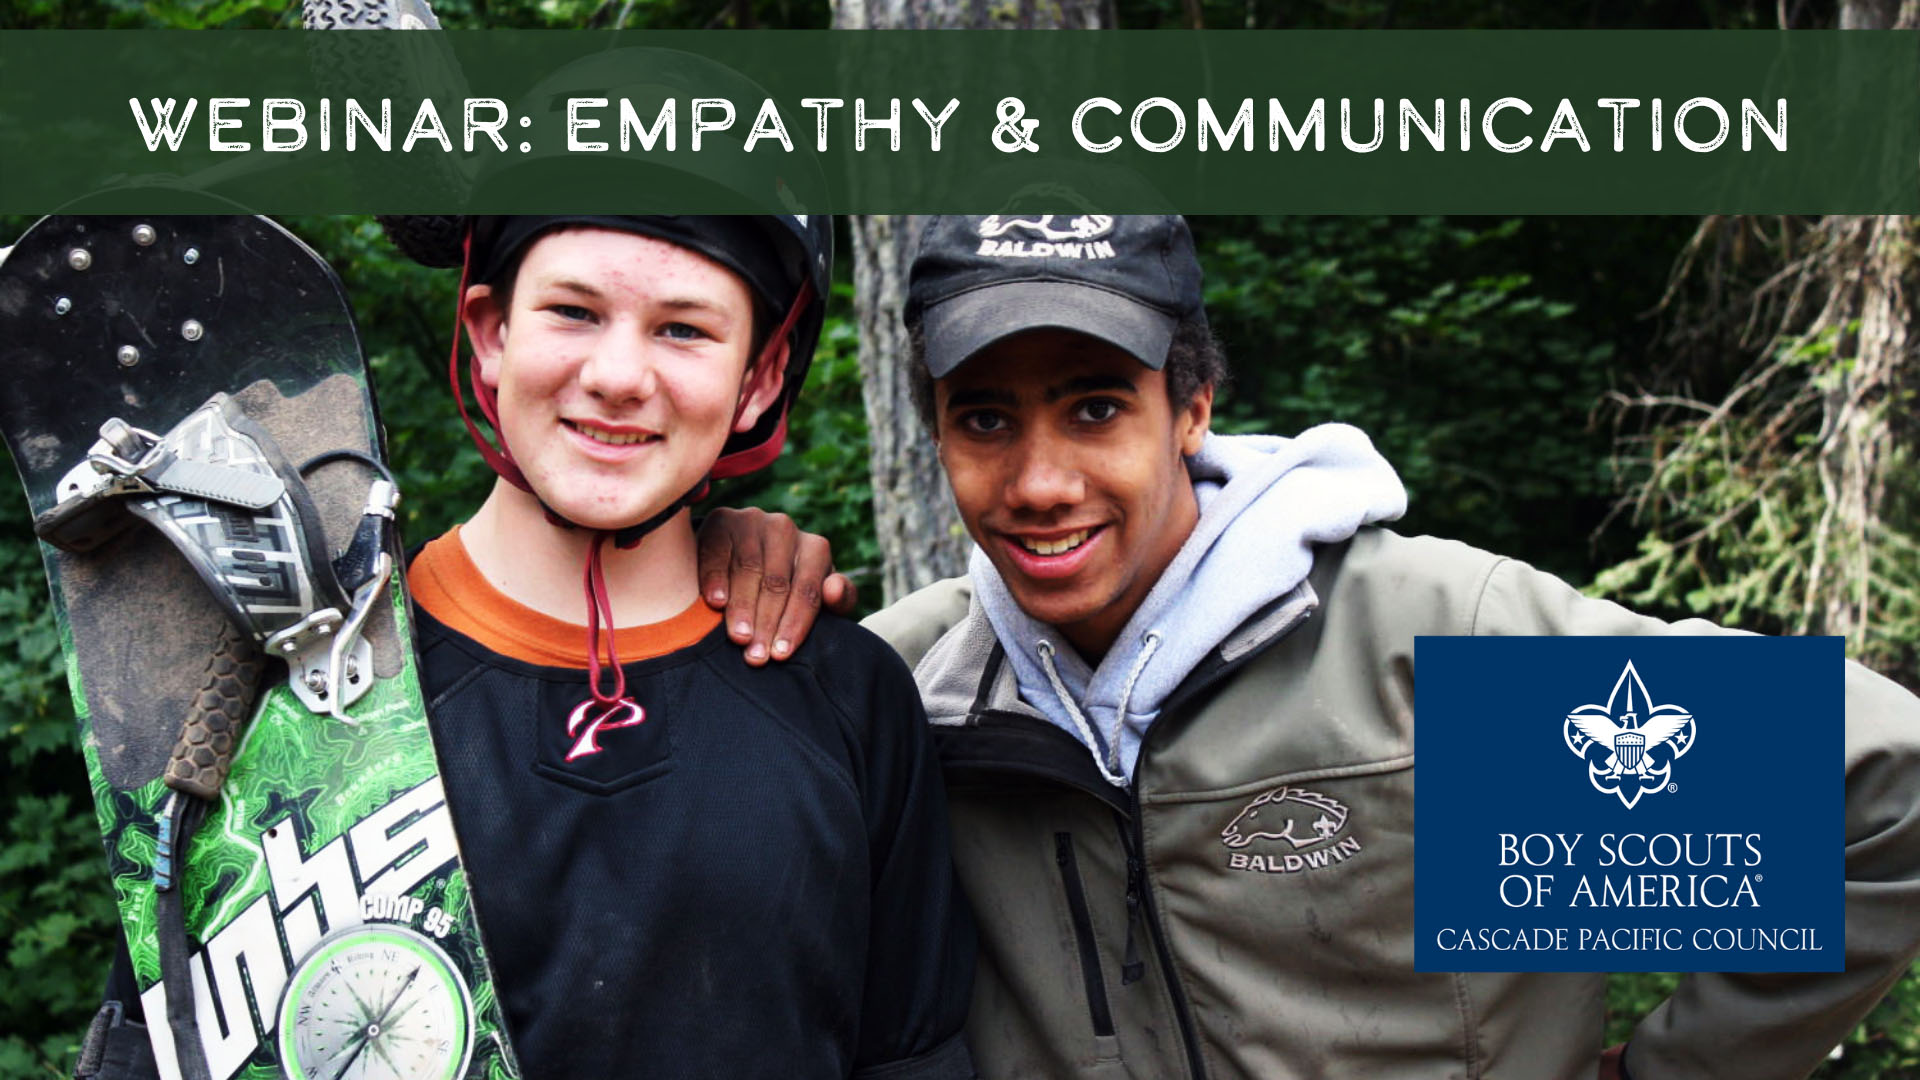 Webinar: Empathy & Communications for Scouting